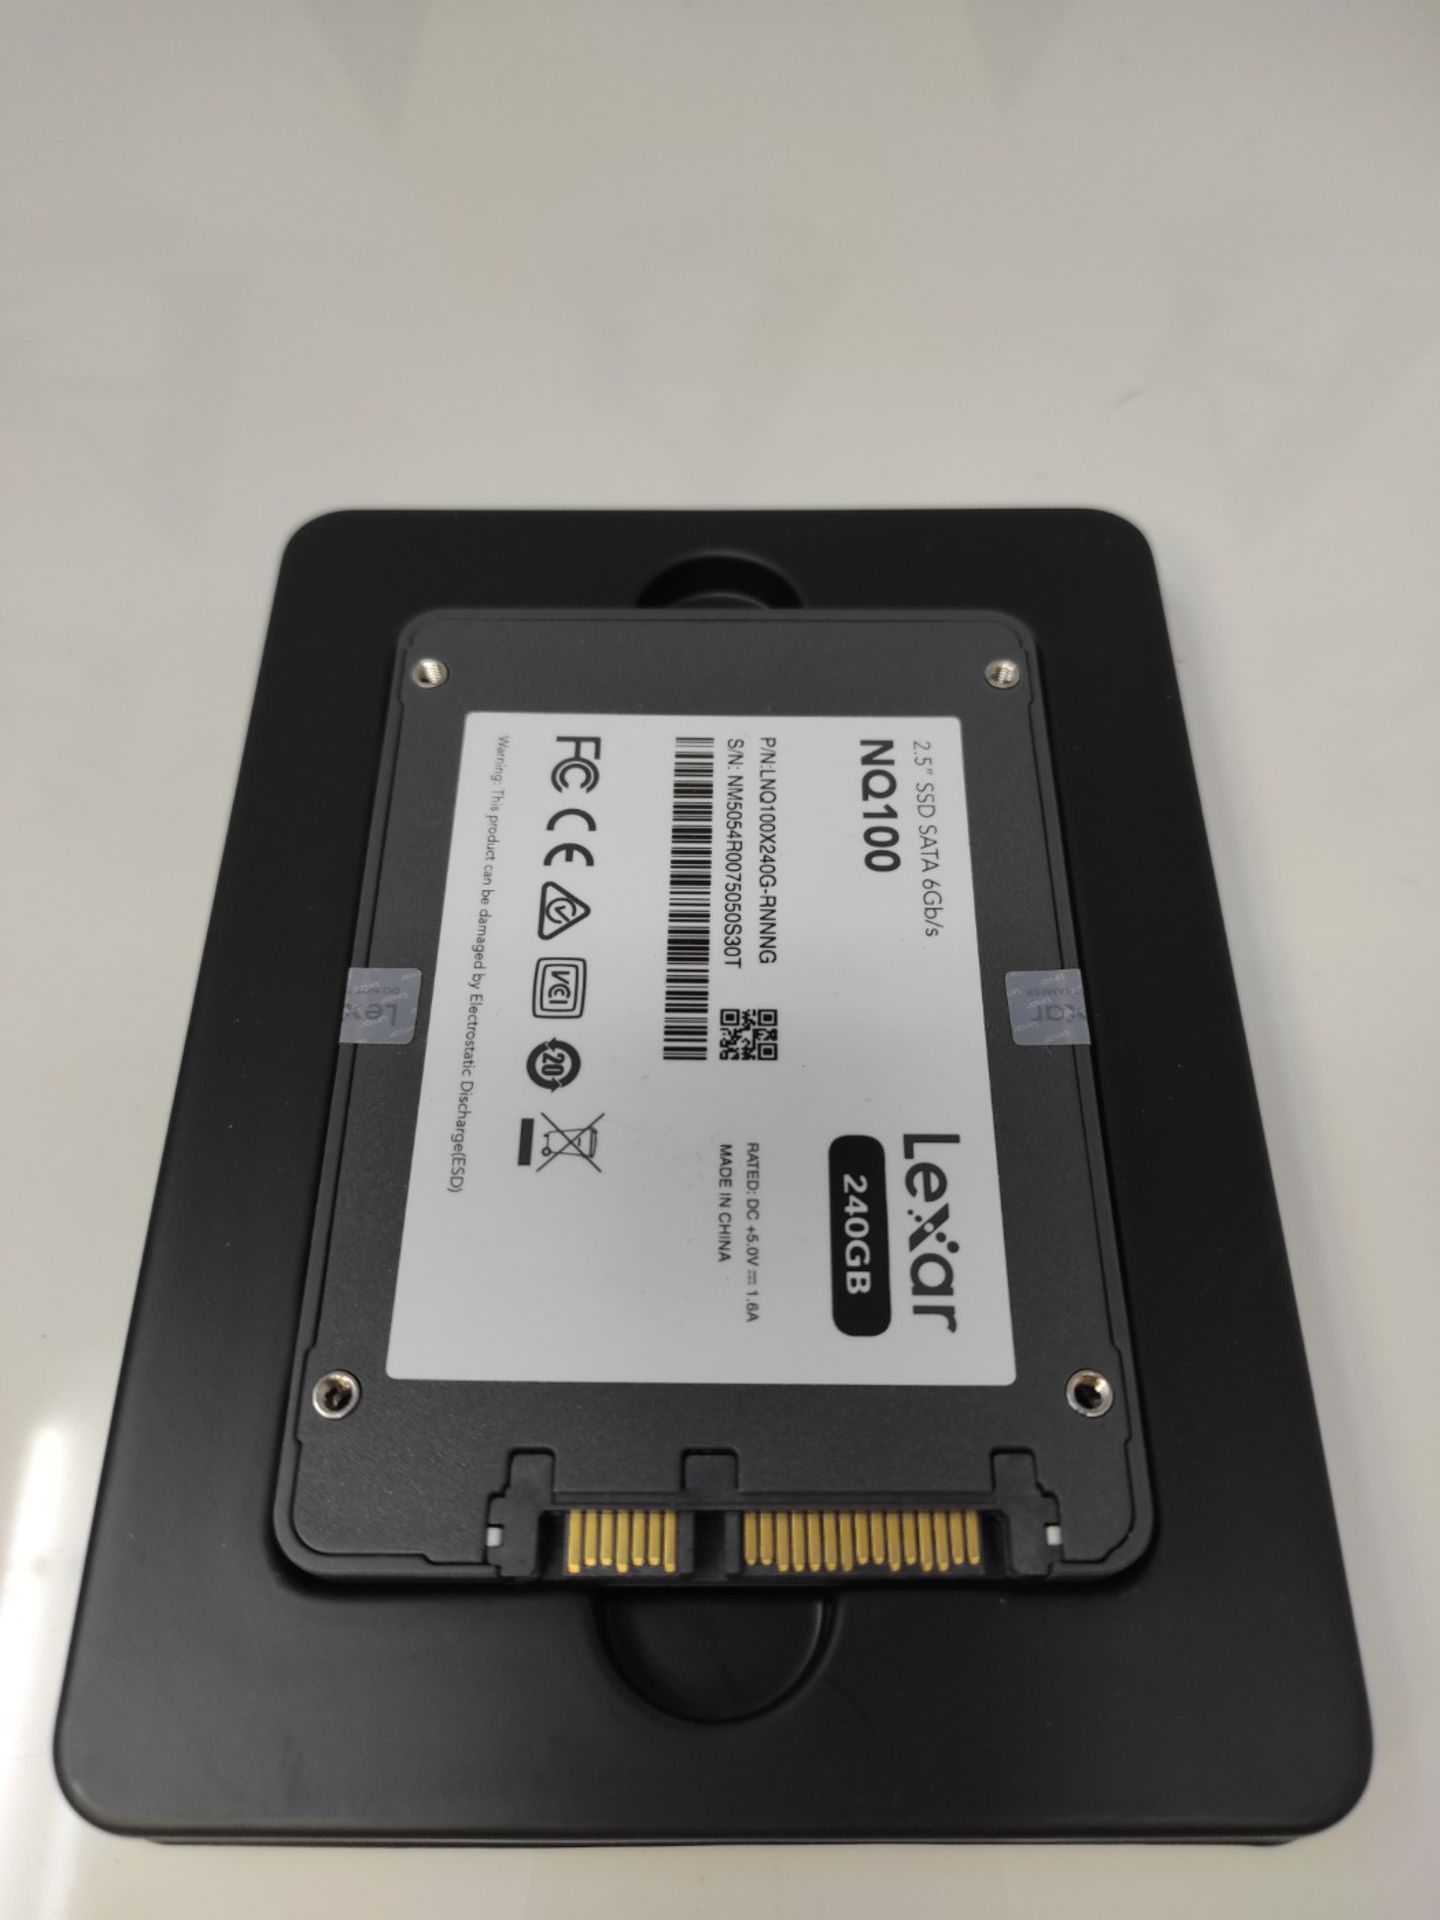 Lexar NQ100 2.5" SATA III (6 Gb/s) 240 GB SSD, Up to 550 MB/s Read Solid State Drive, - Image 3 of 3